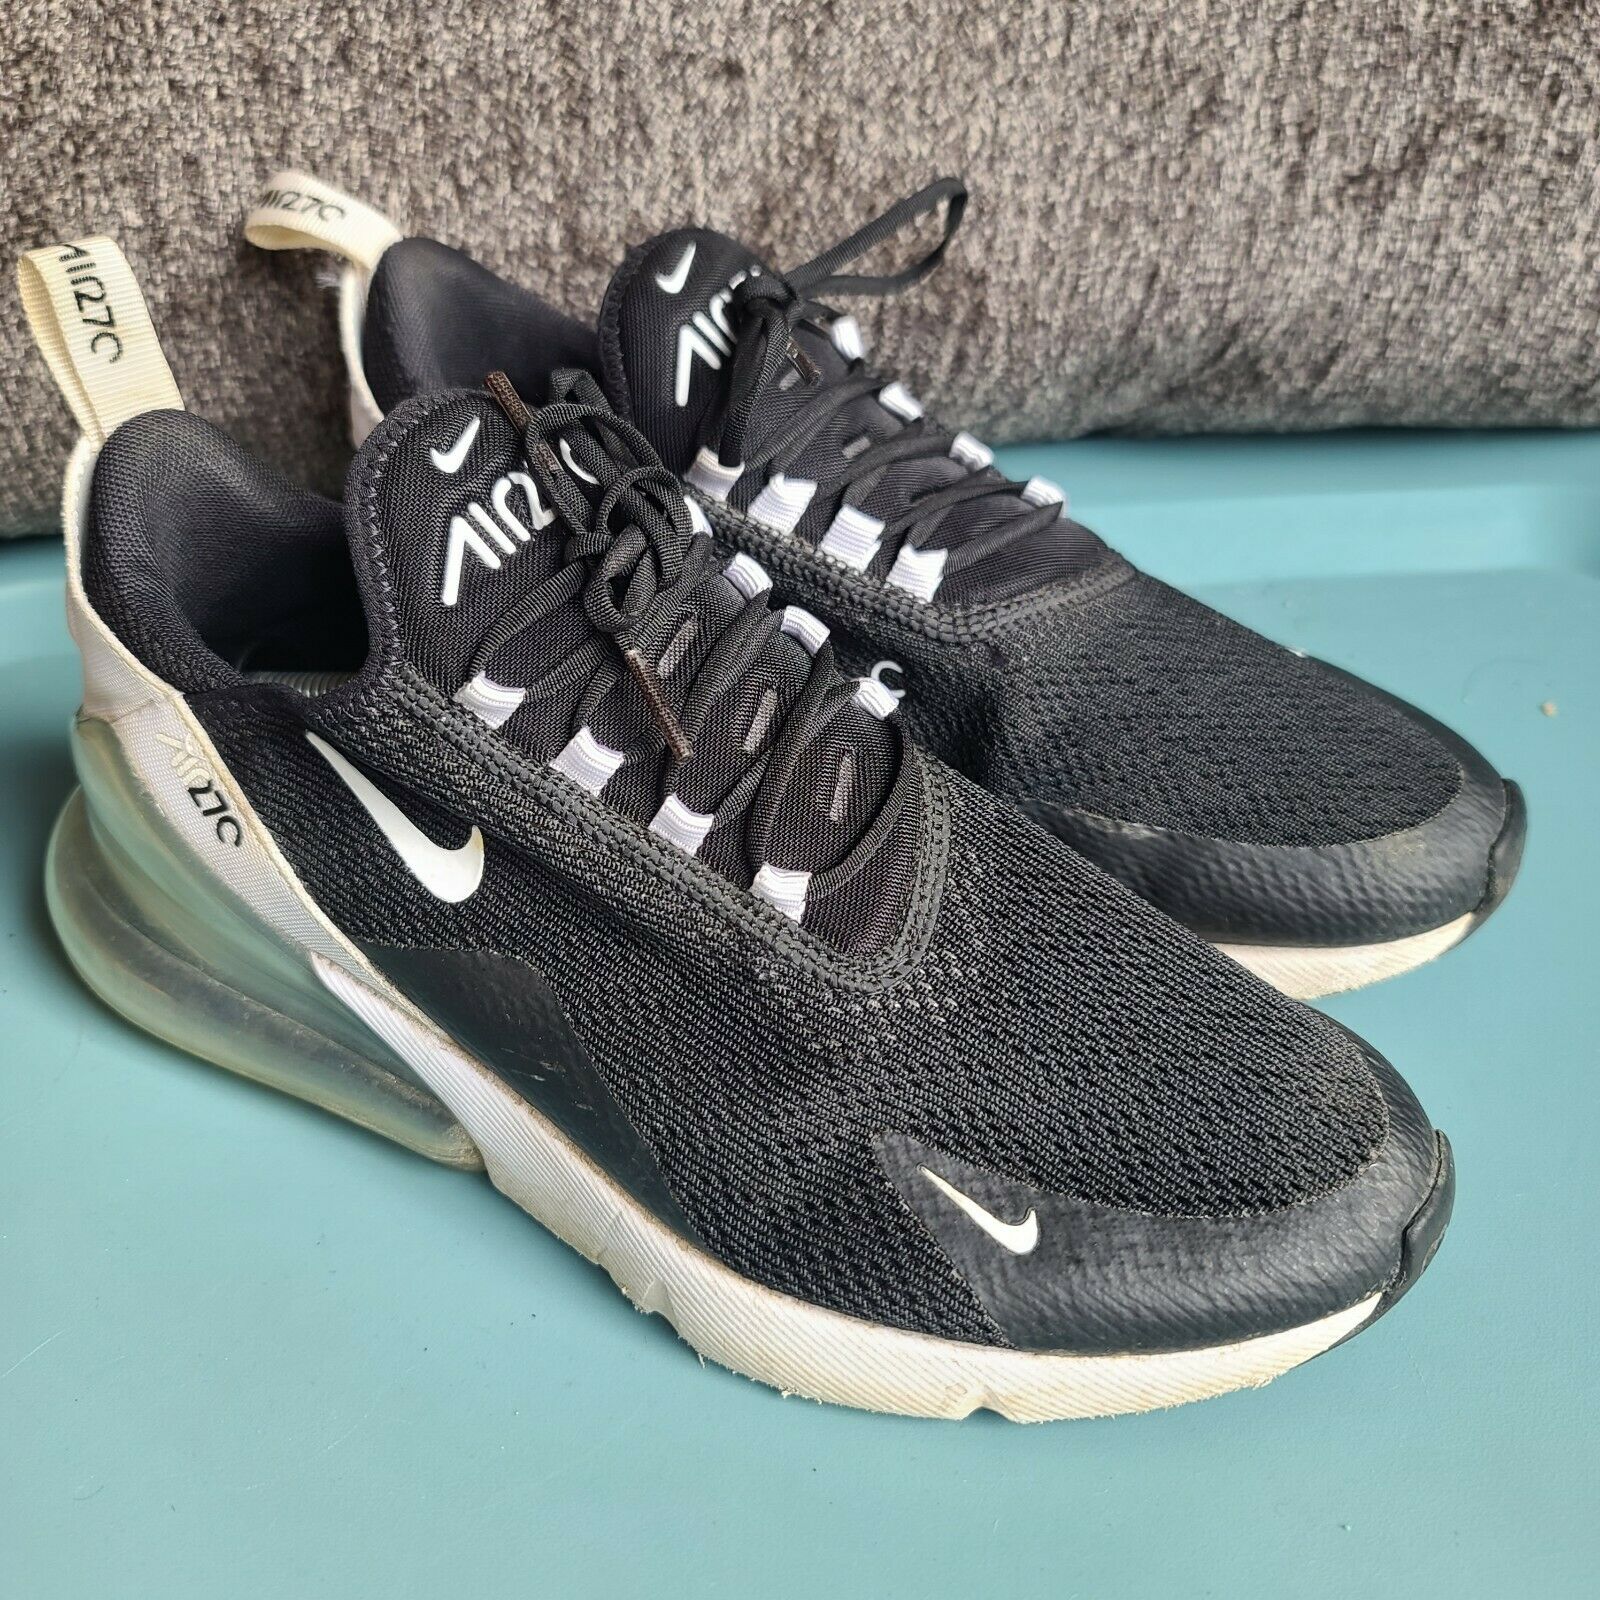 Nike Ladies Air Max 270 Sneakers Size 9.5 Black White Lace Up Shoes